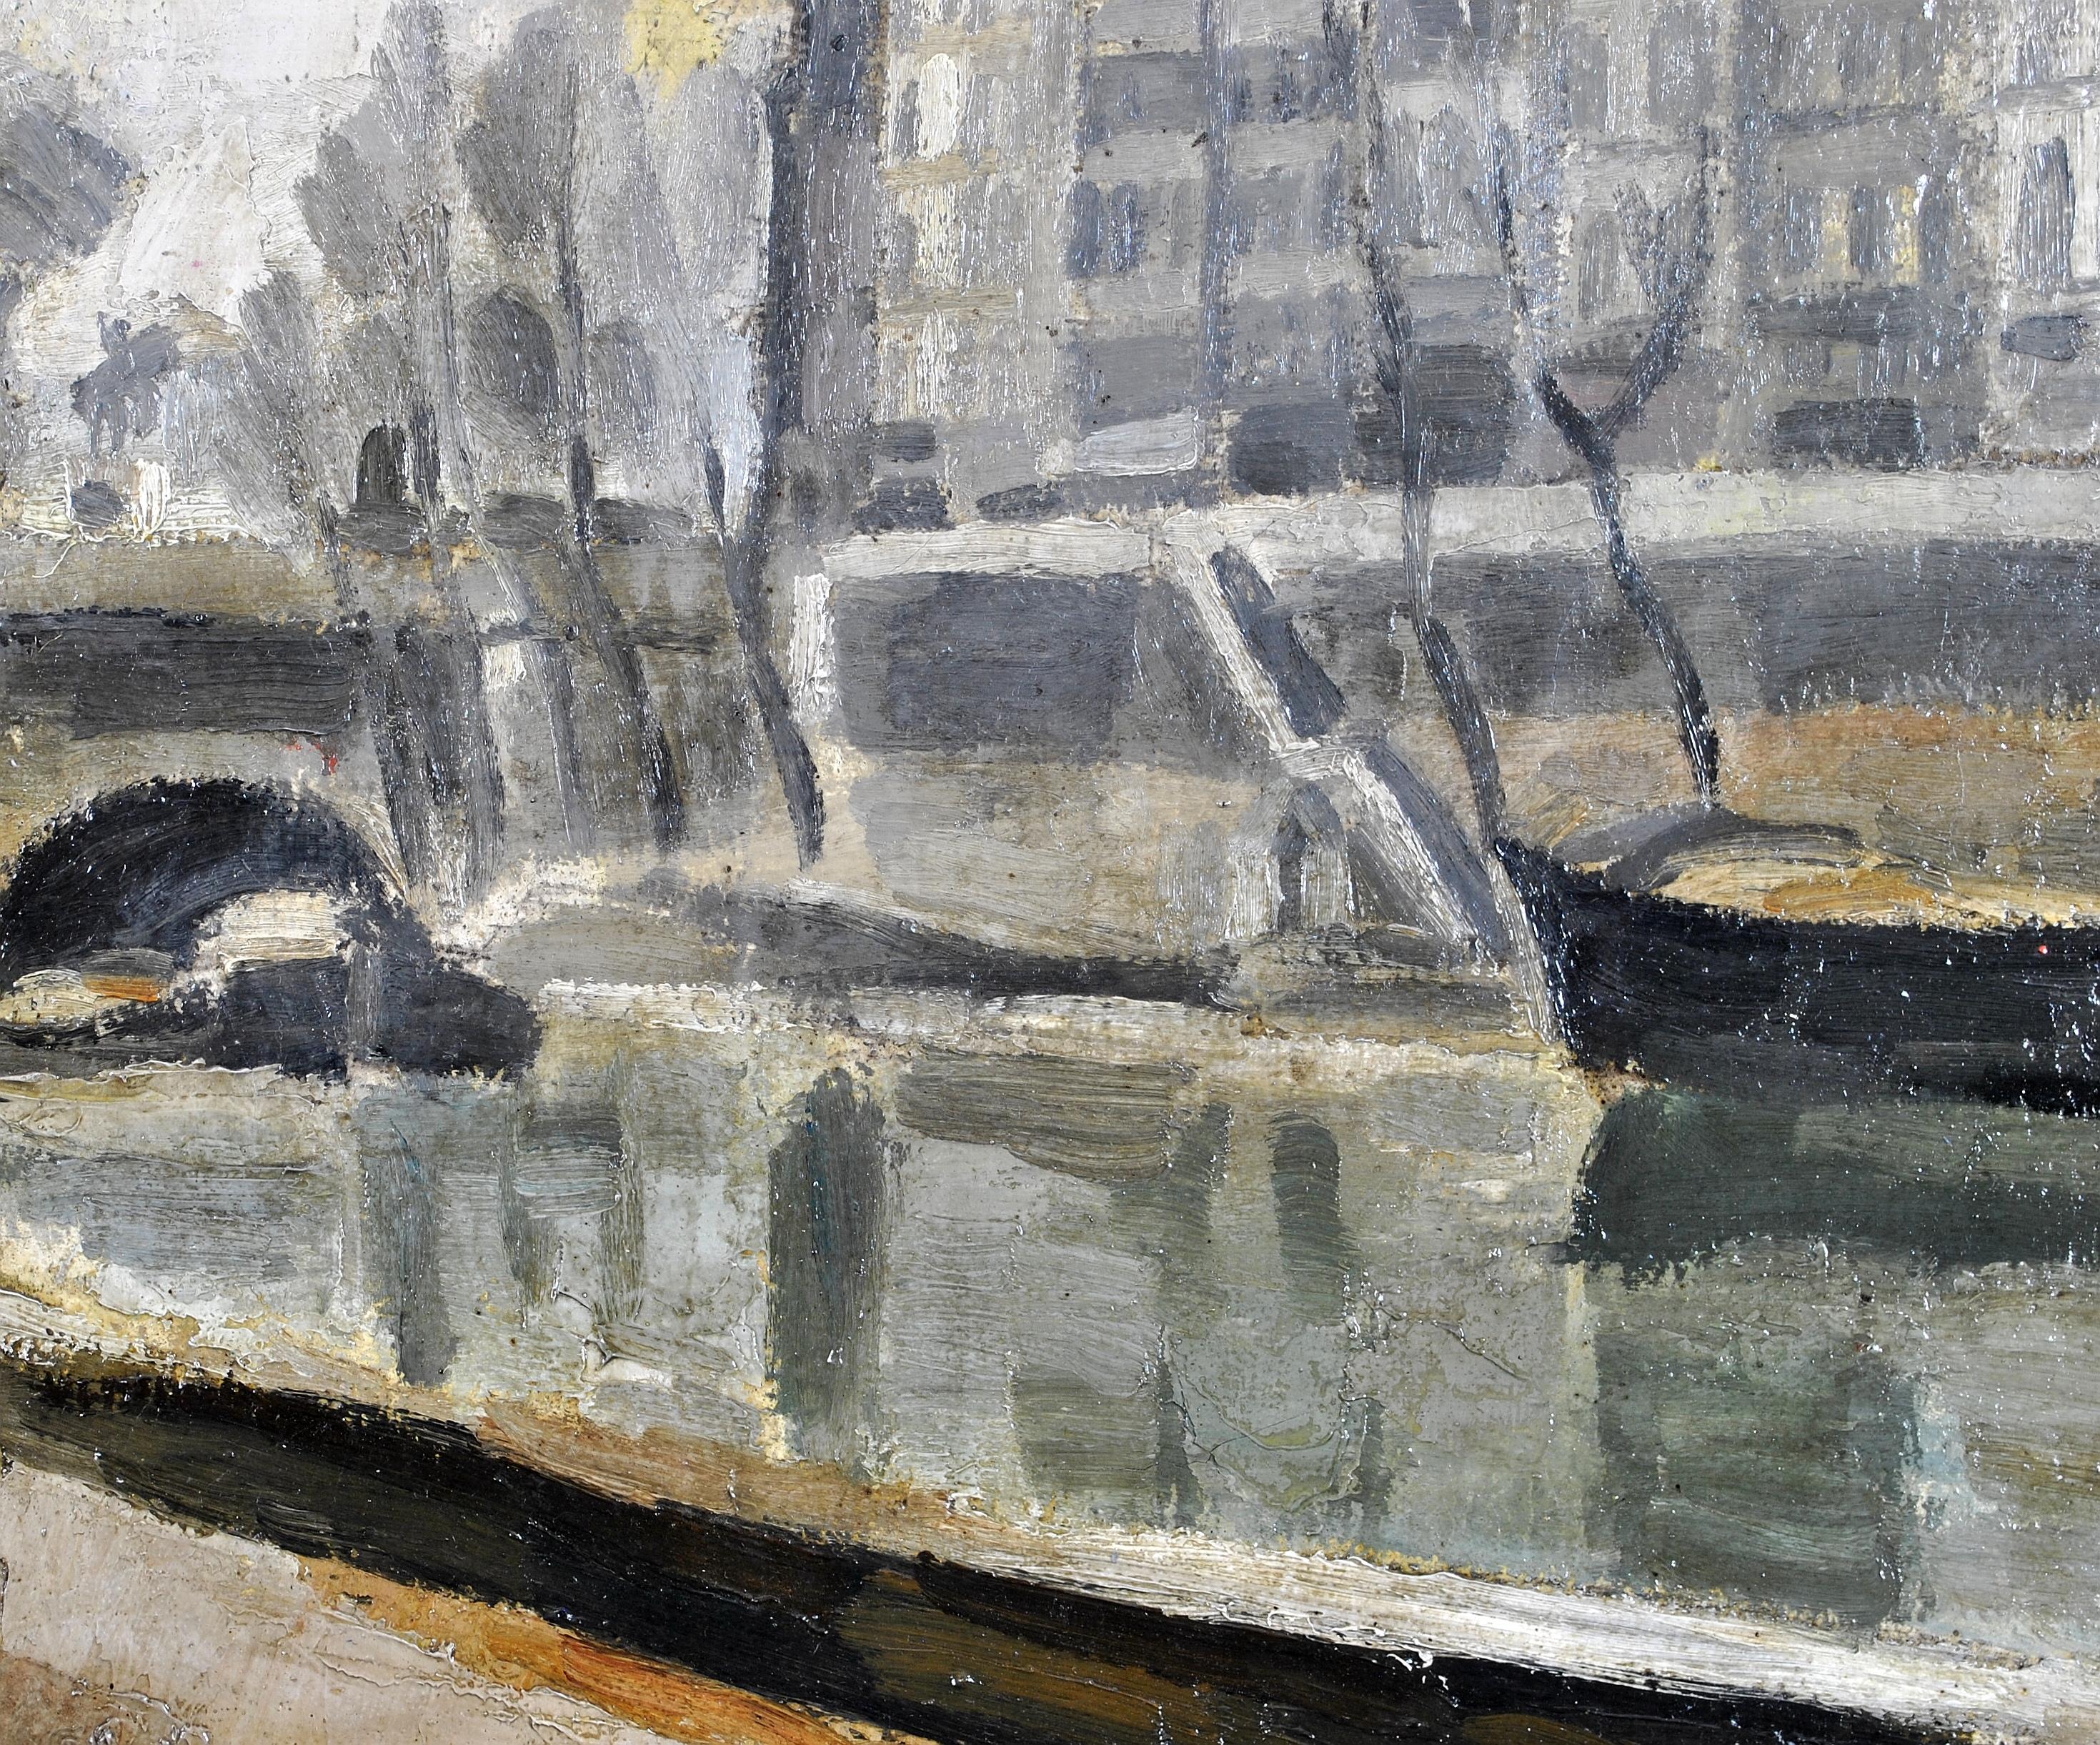 A beautiful 1925 post-impressionist oil on canvas depicting the banks of the river Seine in Paris, by Georges Pacouil. Excellent quality early work by this interesting French artist. Signed ''Georges Pacouil 1925'' lower right and presented in a